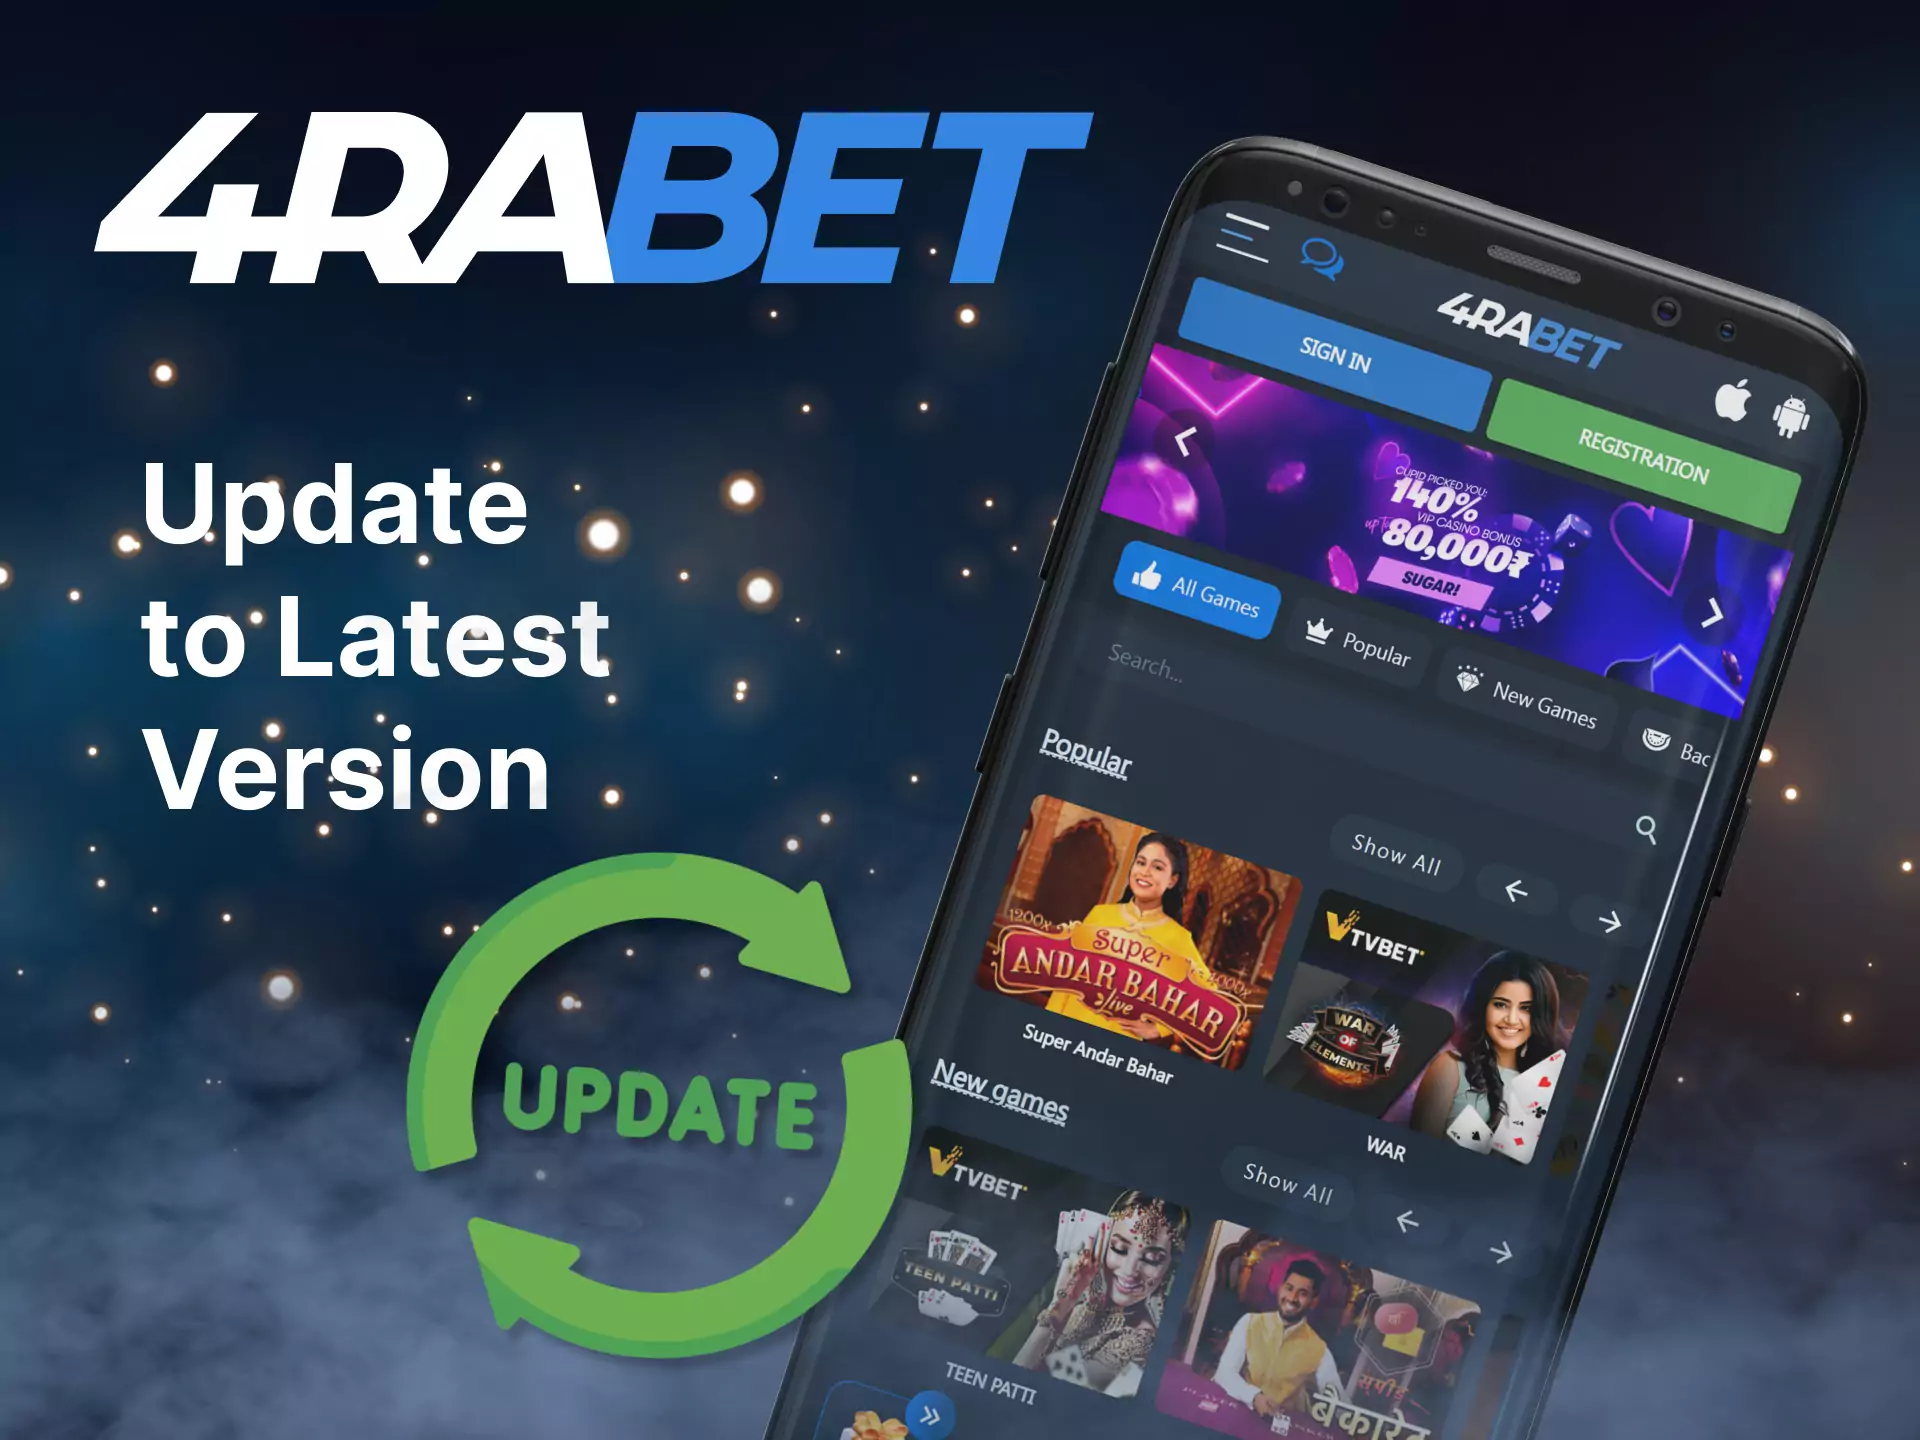 Don't miss the update for the 4rabet mobile app.